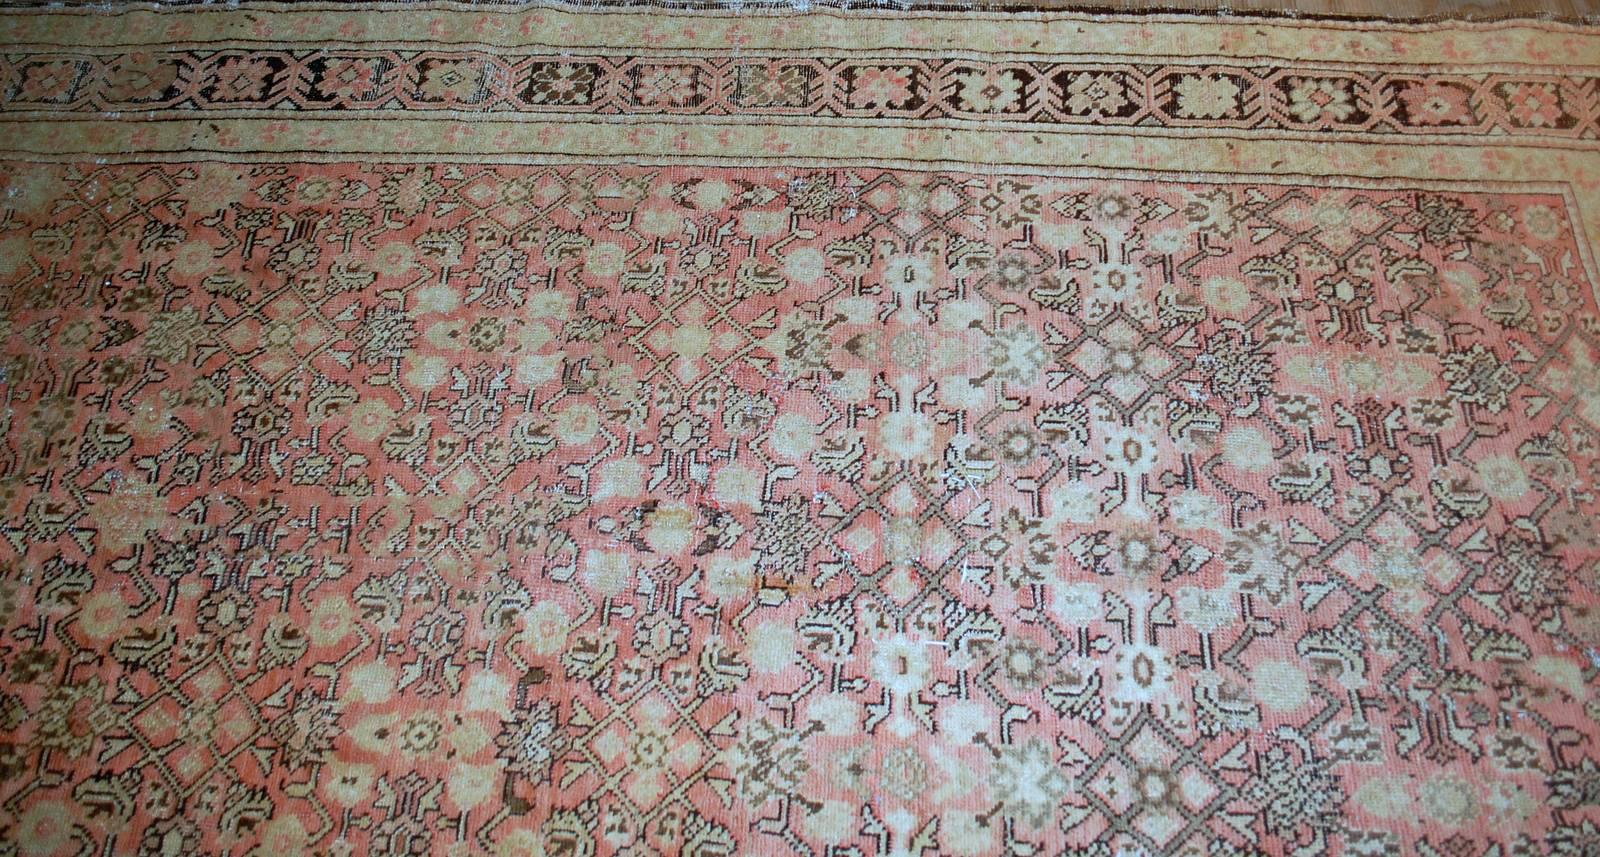 Antique handmade Caucasian Karabagh rug in good condition. This rug made in peach shade with all-over design. Very busy tribal ornaments in chocolate brown shade are decorating this rug. The border is in similar shade of brown and decorated in